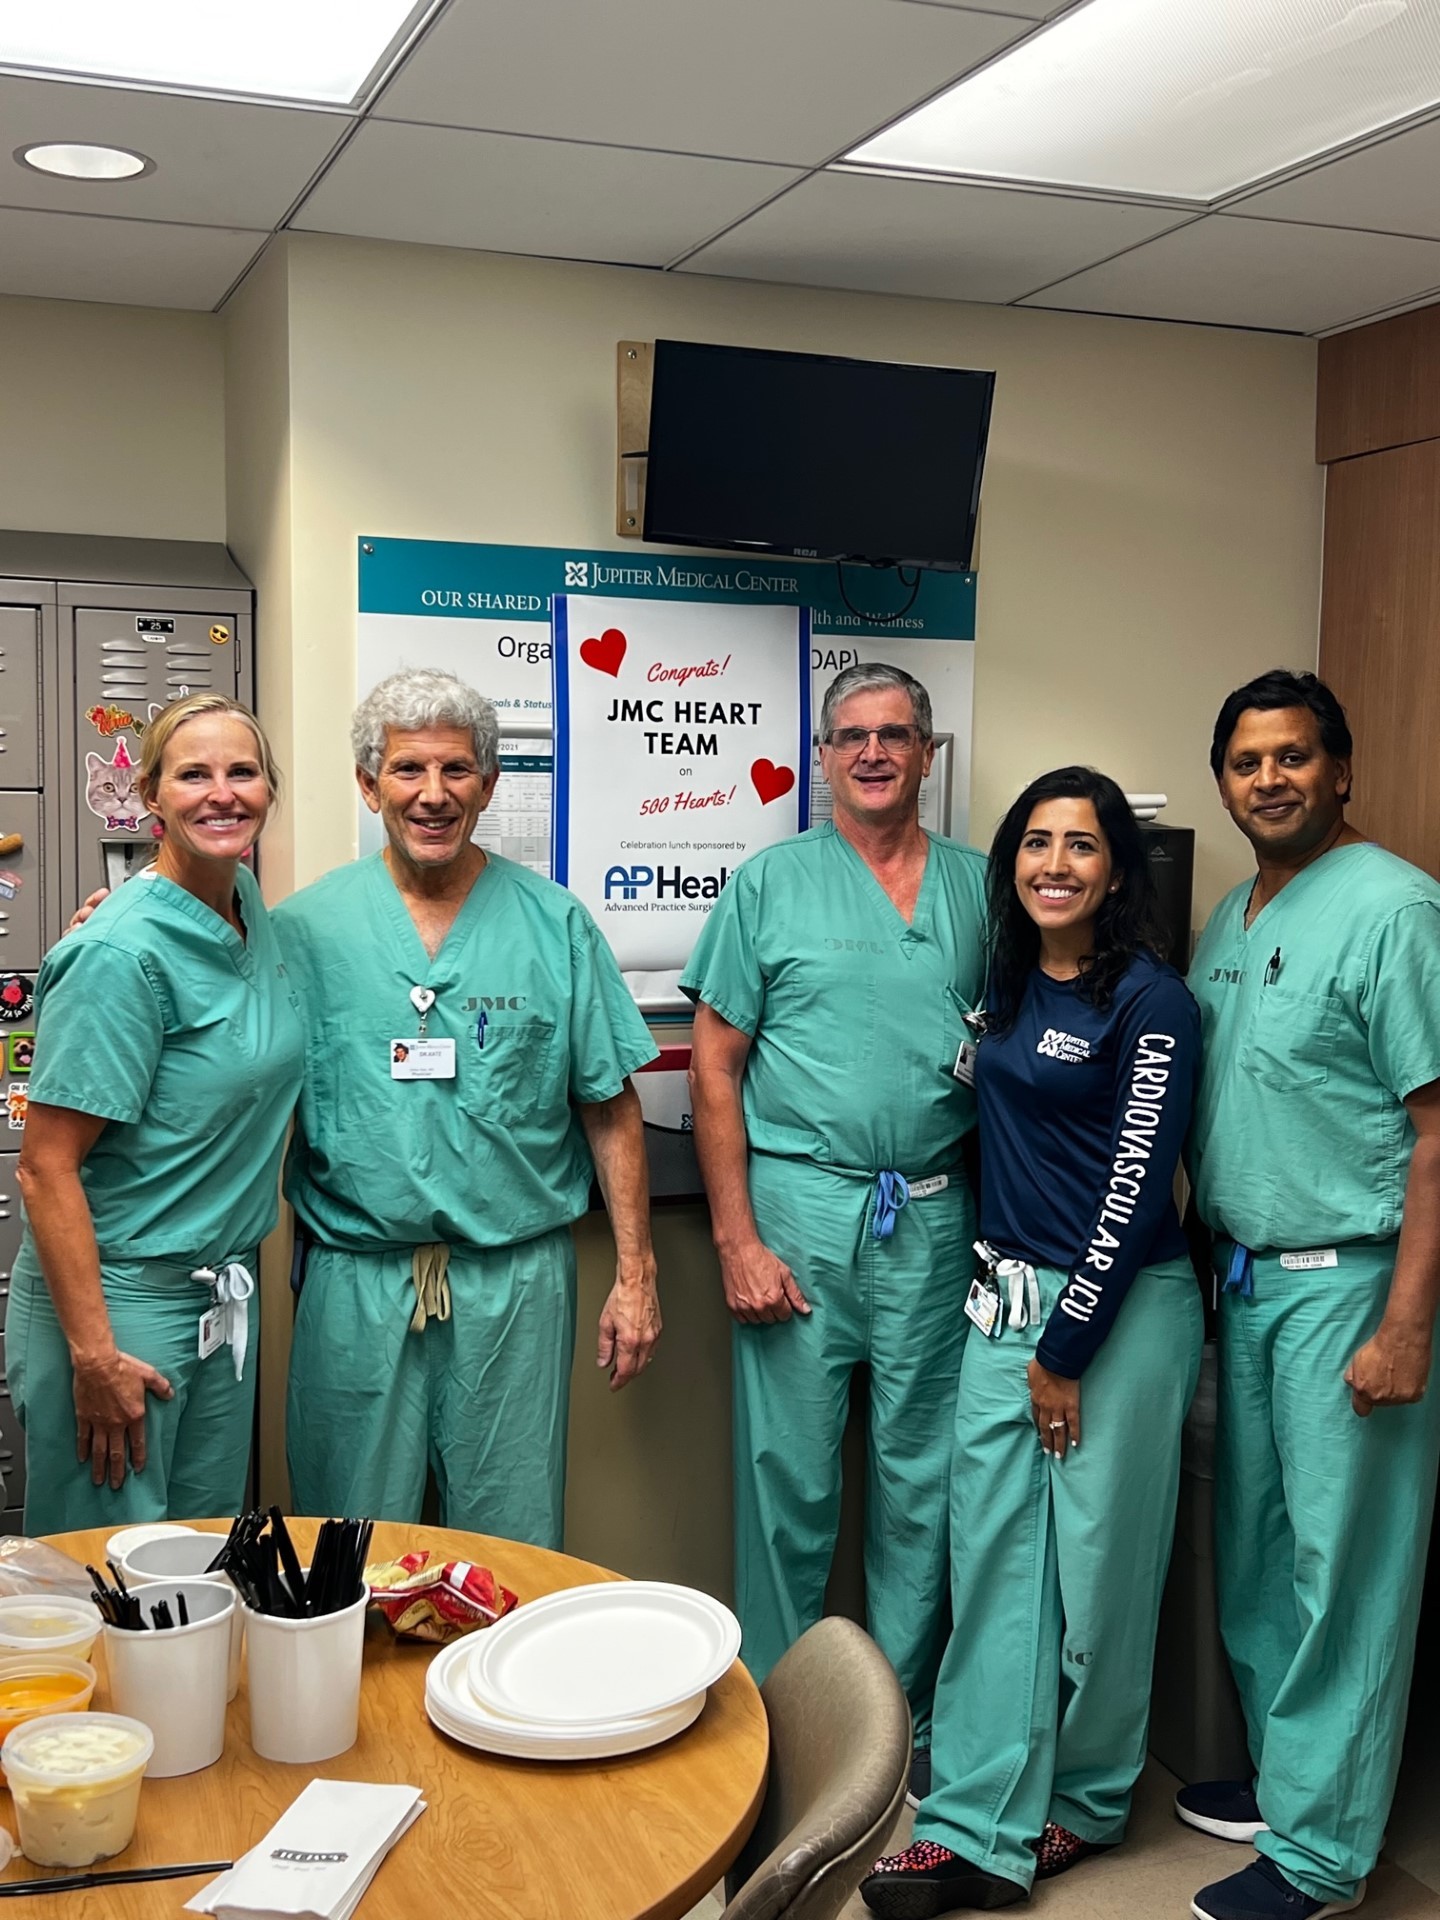 Our cardiac team celebrating a milestone of 500 heart operations with two of our top surgeons at Jupiter Medical Center 